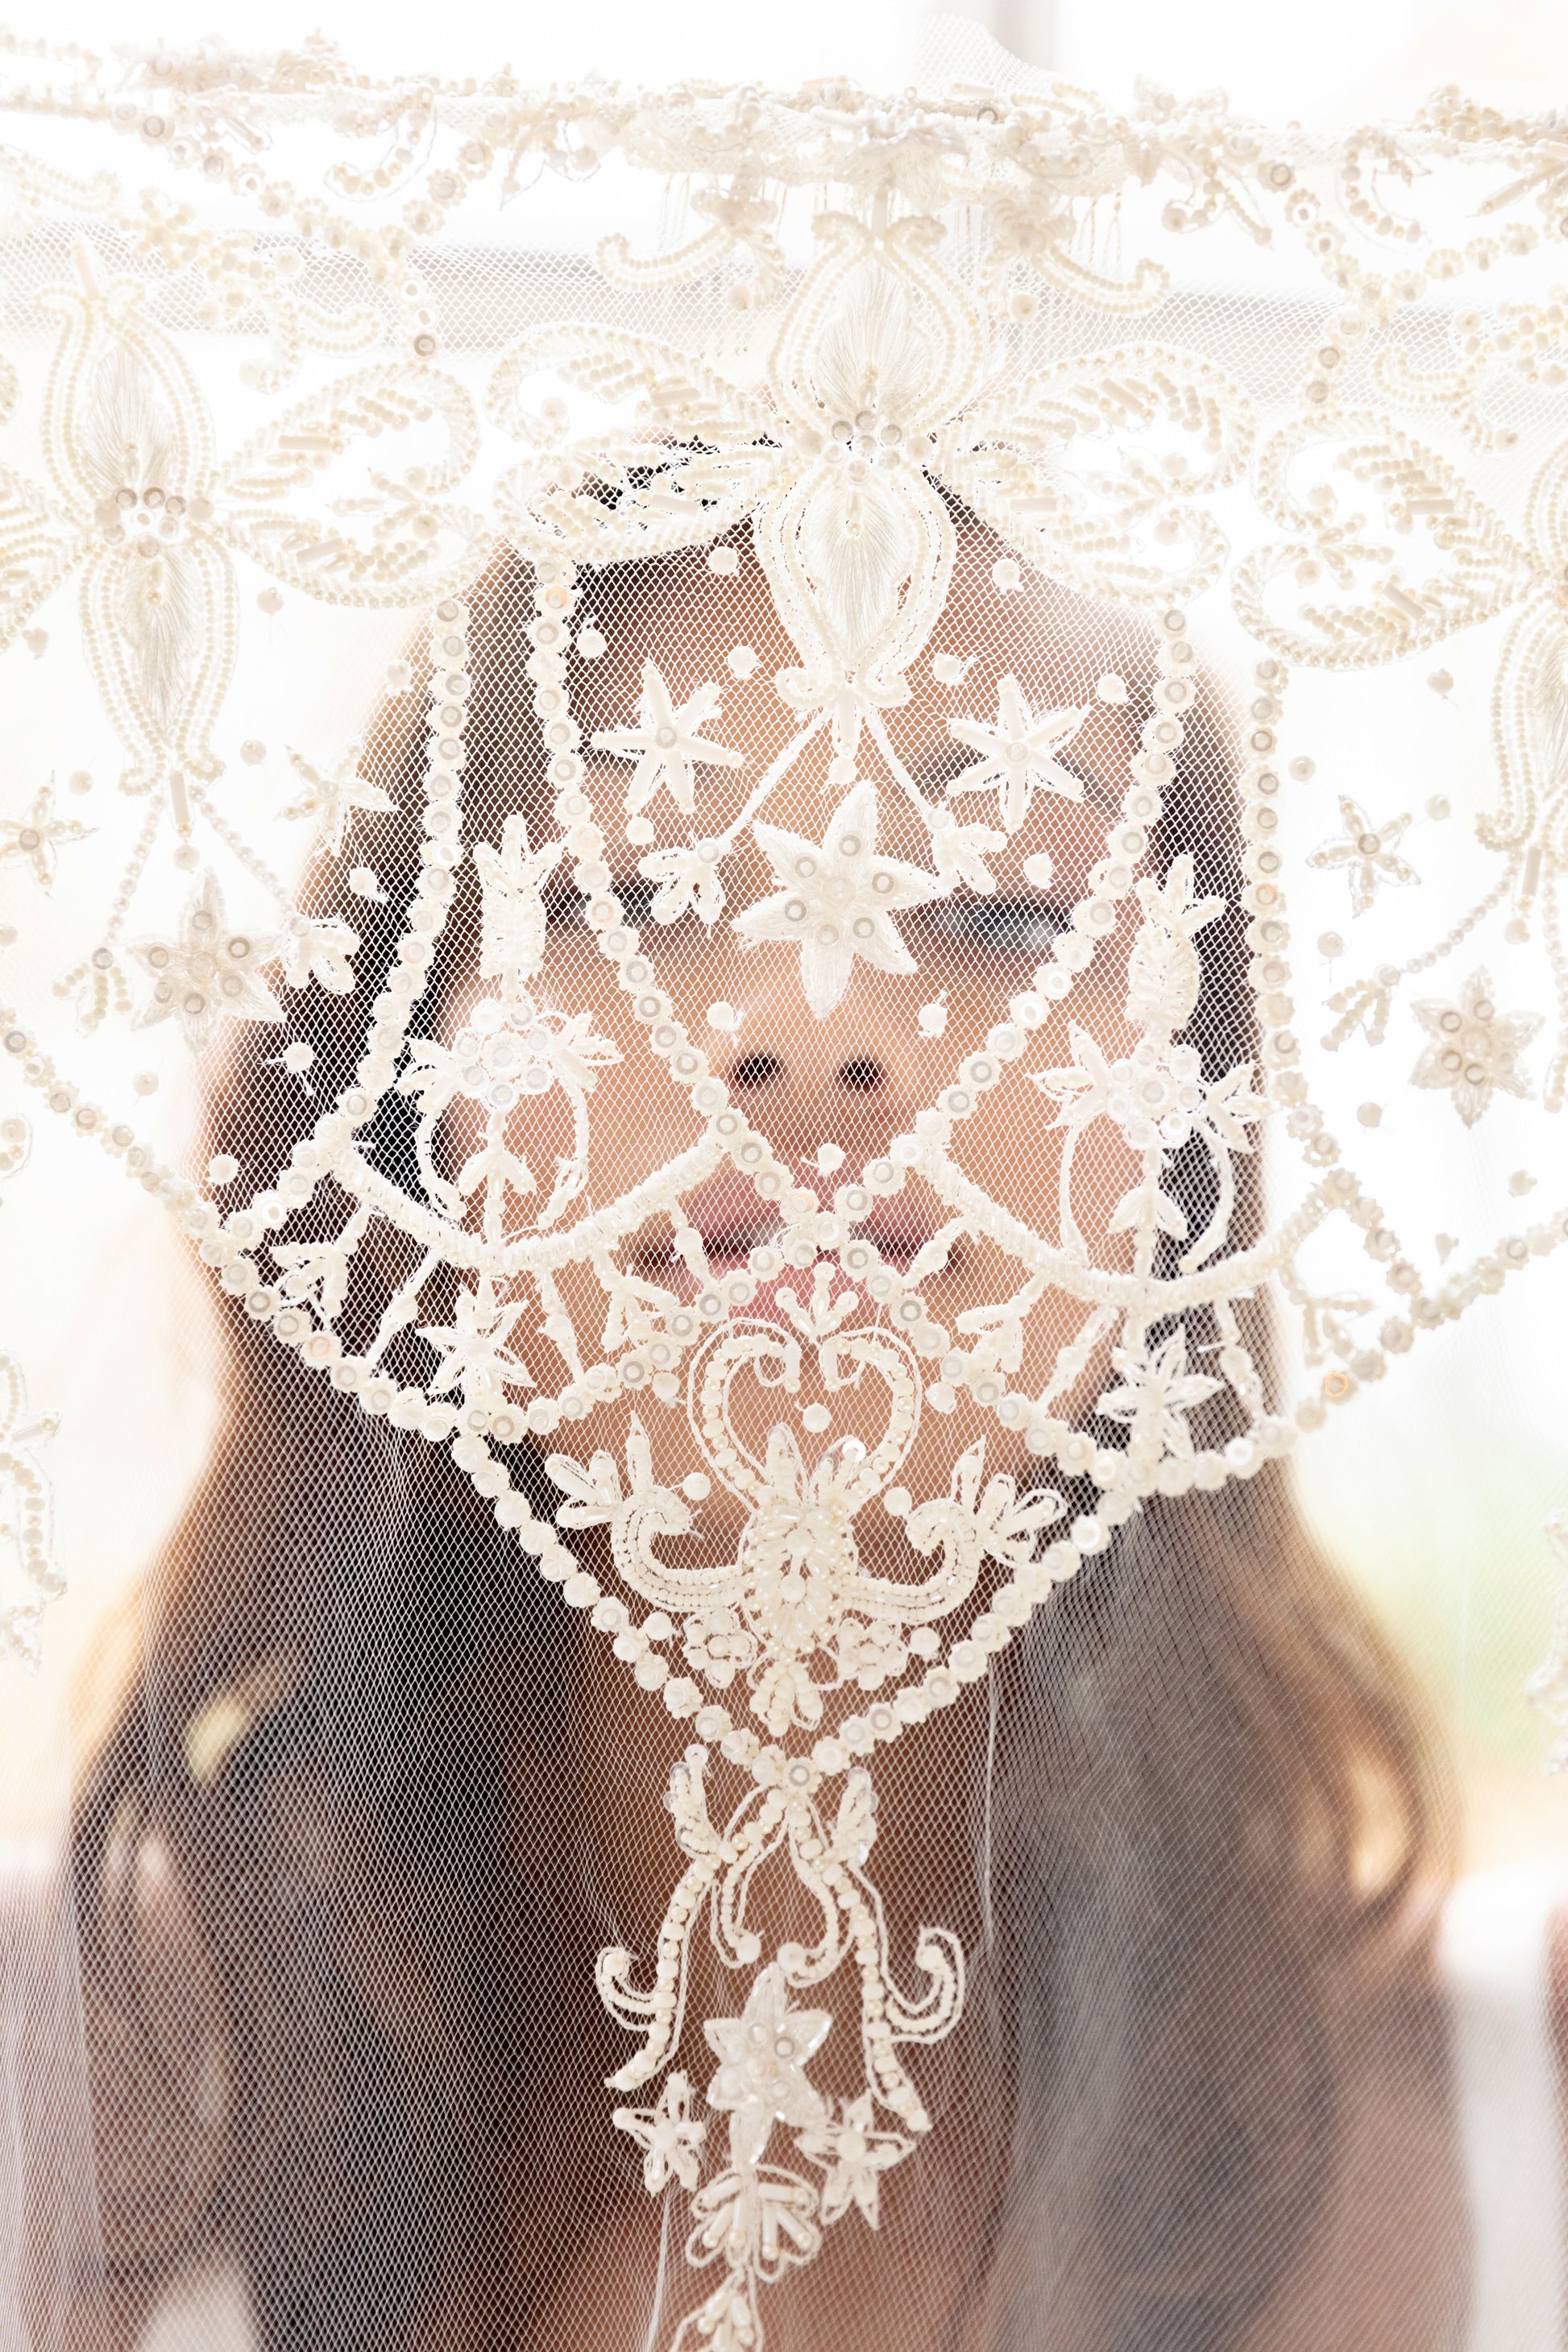 ANABELLE VEIL BEAD DETAILS  by Camilla Christine Bridal Accessories and Wedding Jewelry, Hand Beaded Floral Lace Pattern Mantilla Veil  Embroidered Statement Bridal Veil  Spanish Style Cathedral Veil Boho Wedding Hair Accessories, bridal Style Inspiration, Wedding Accessory Trends, Bridal Fashion, Wedding Veil Styles